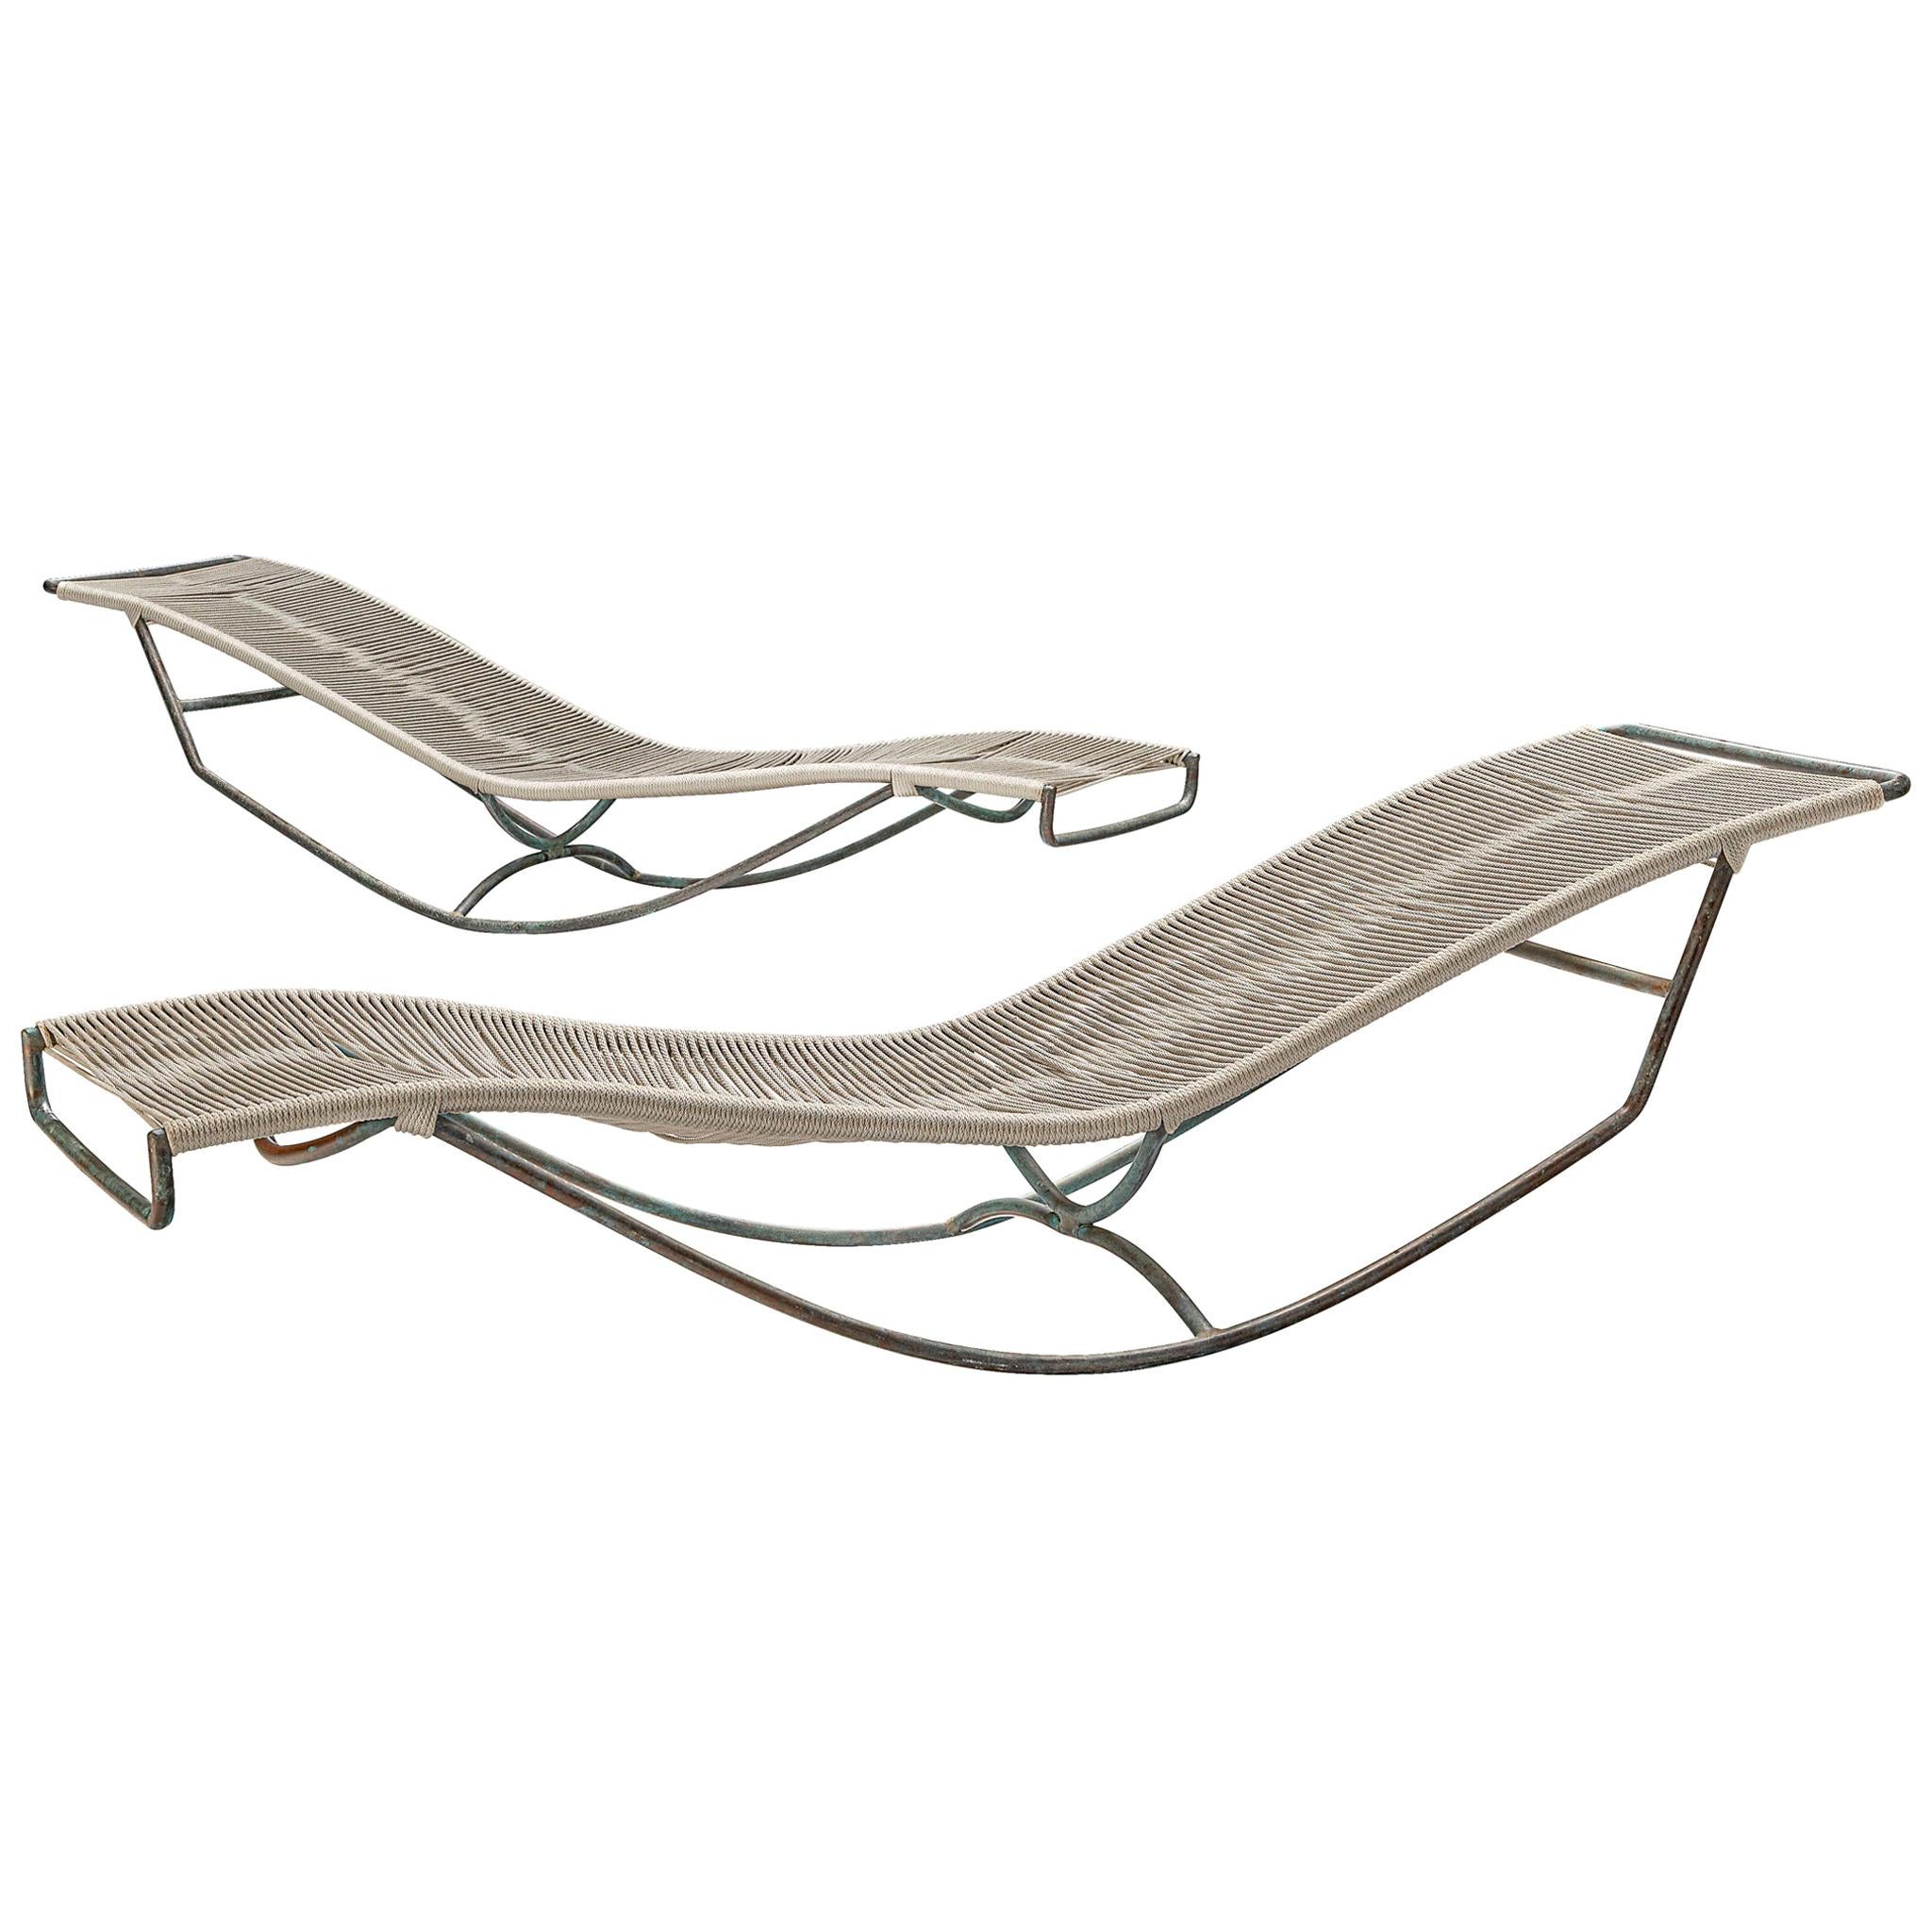 Walter Lamb for Brown Jordan, 'Waikiki' chaise lounge C-4720, bronze, cord, United States, 1950s

The chaise lounge model C-4720 by Walter Lamb is nicknamed 'Waikiki' after the district of Honolulu, Hawaii. Lamb designed the chaise lounge as a